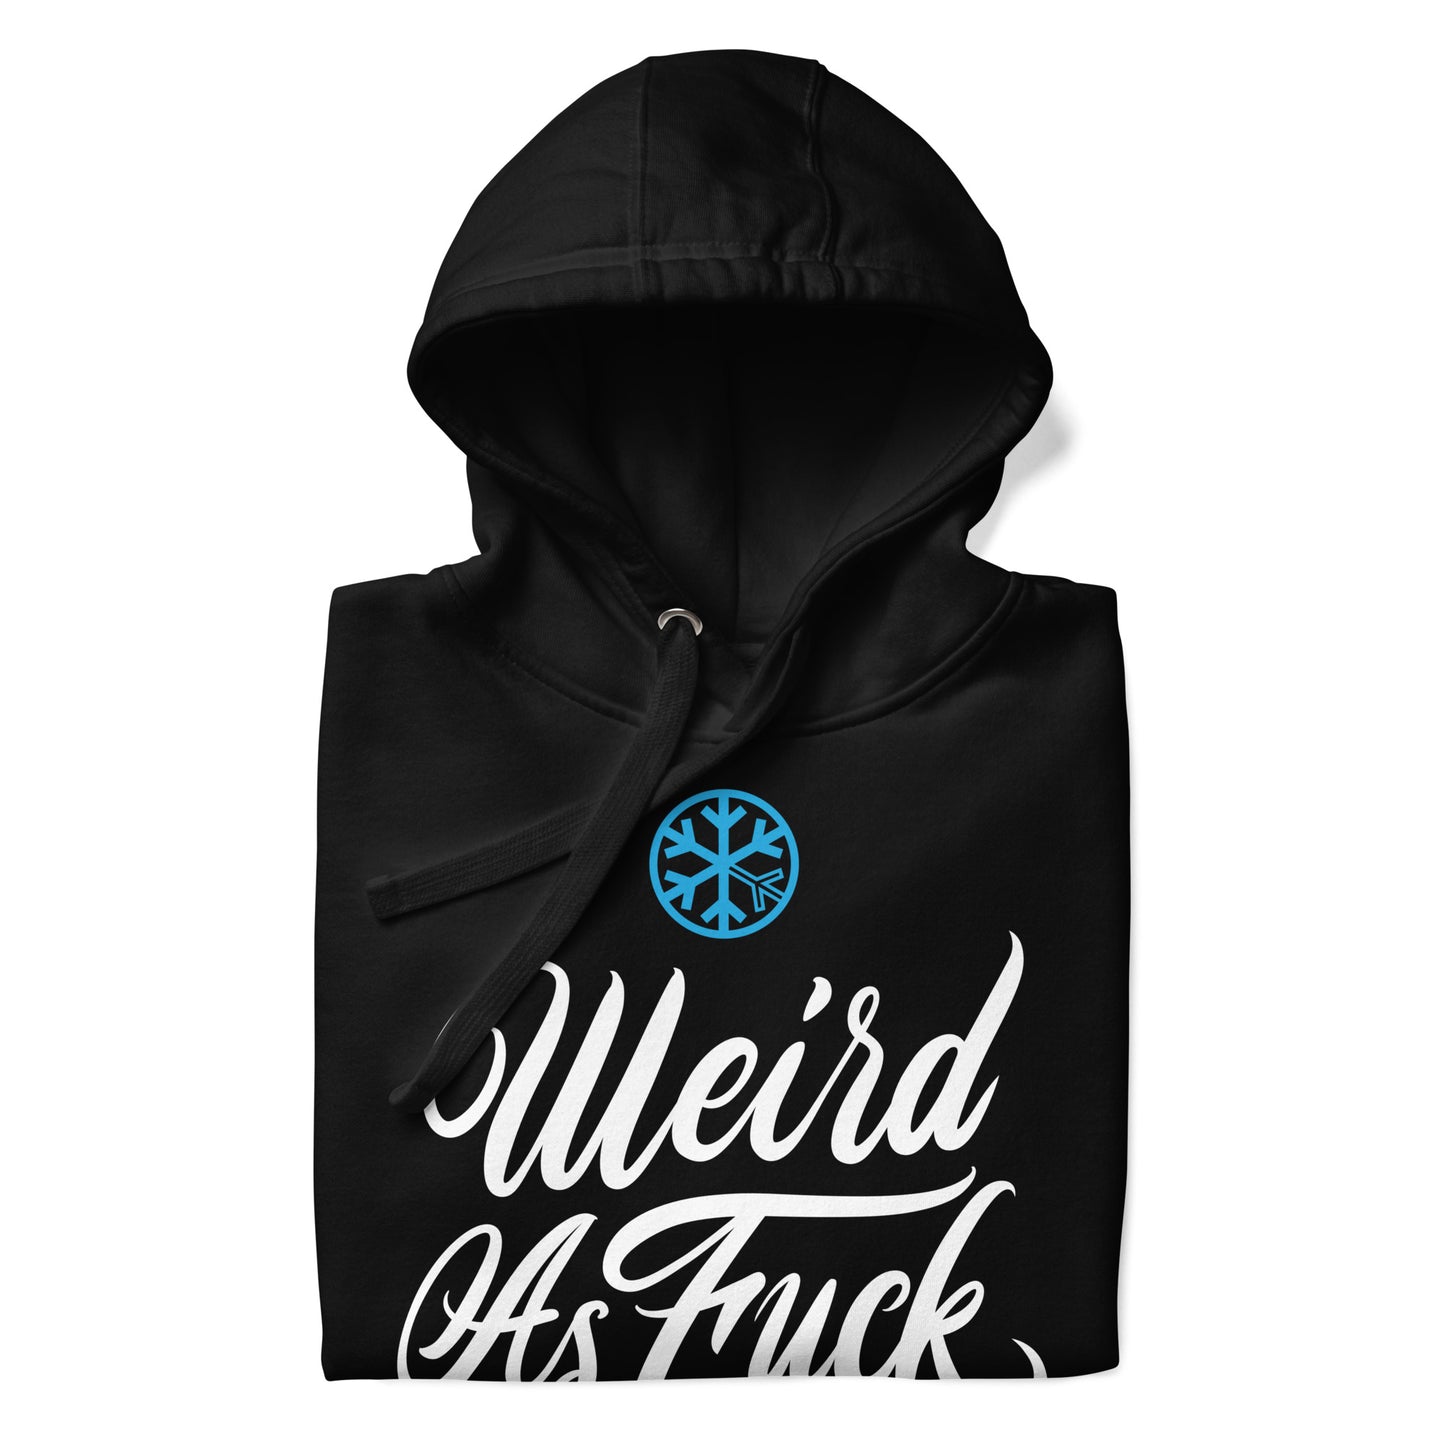 folded Weird As Fuck black hoodie by B.Different Clothing independent streetwear inspired by street art graffiti